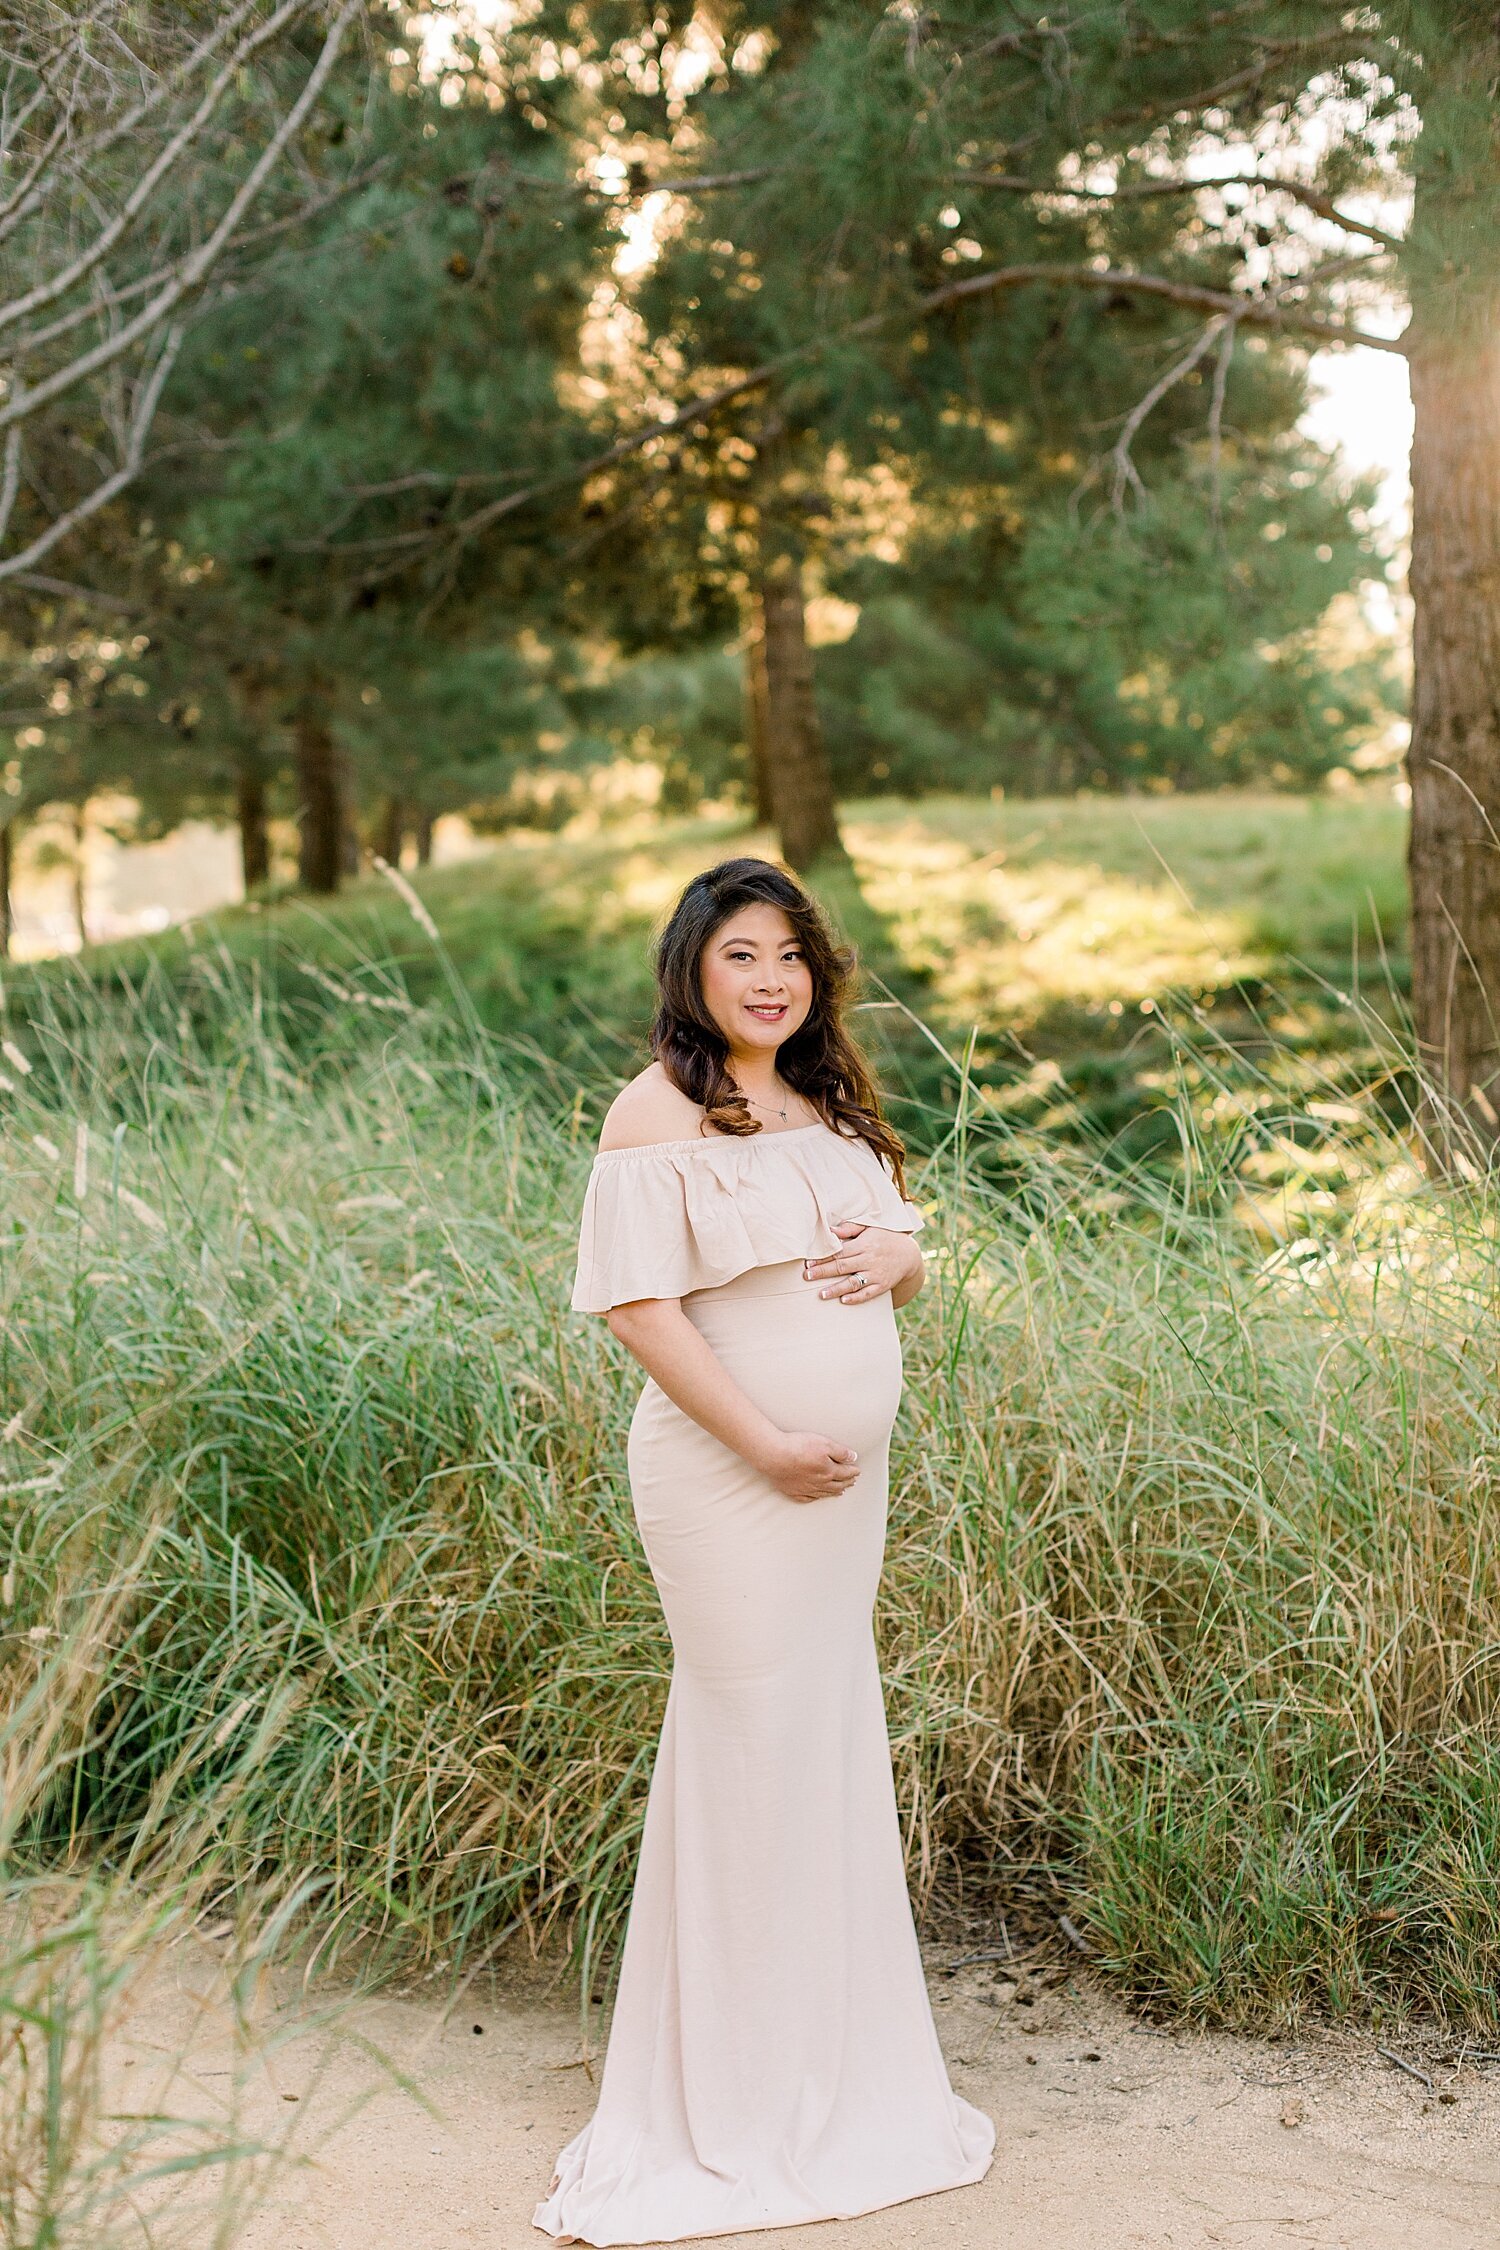 Maternity photos with Irvine Photographer, Ambre Williams Photography.